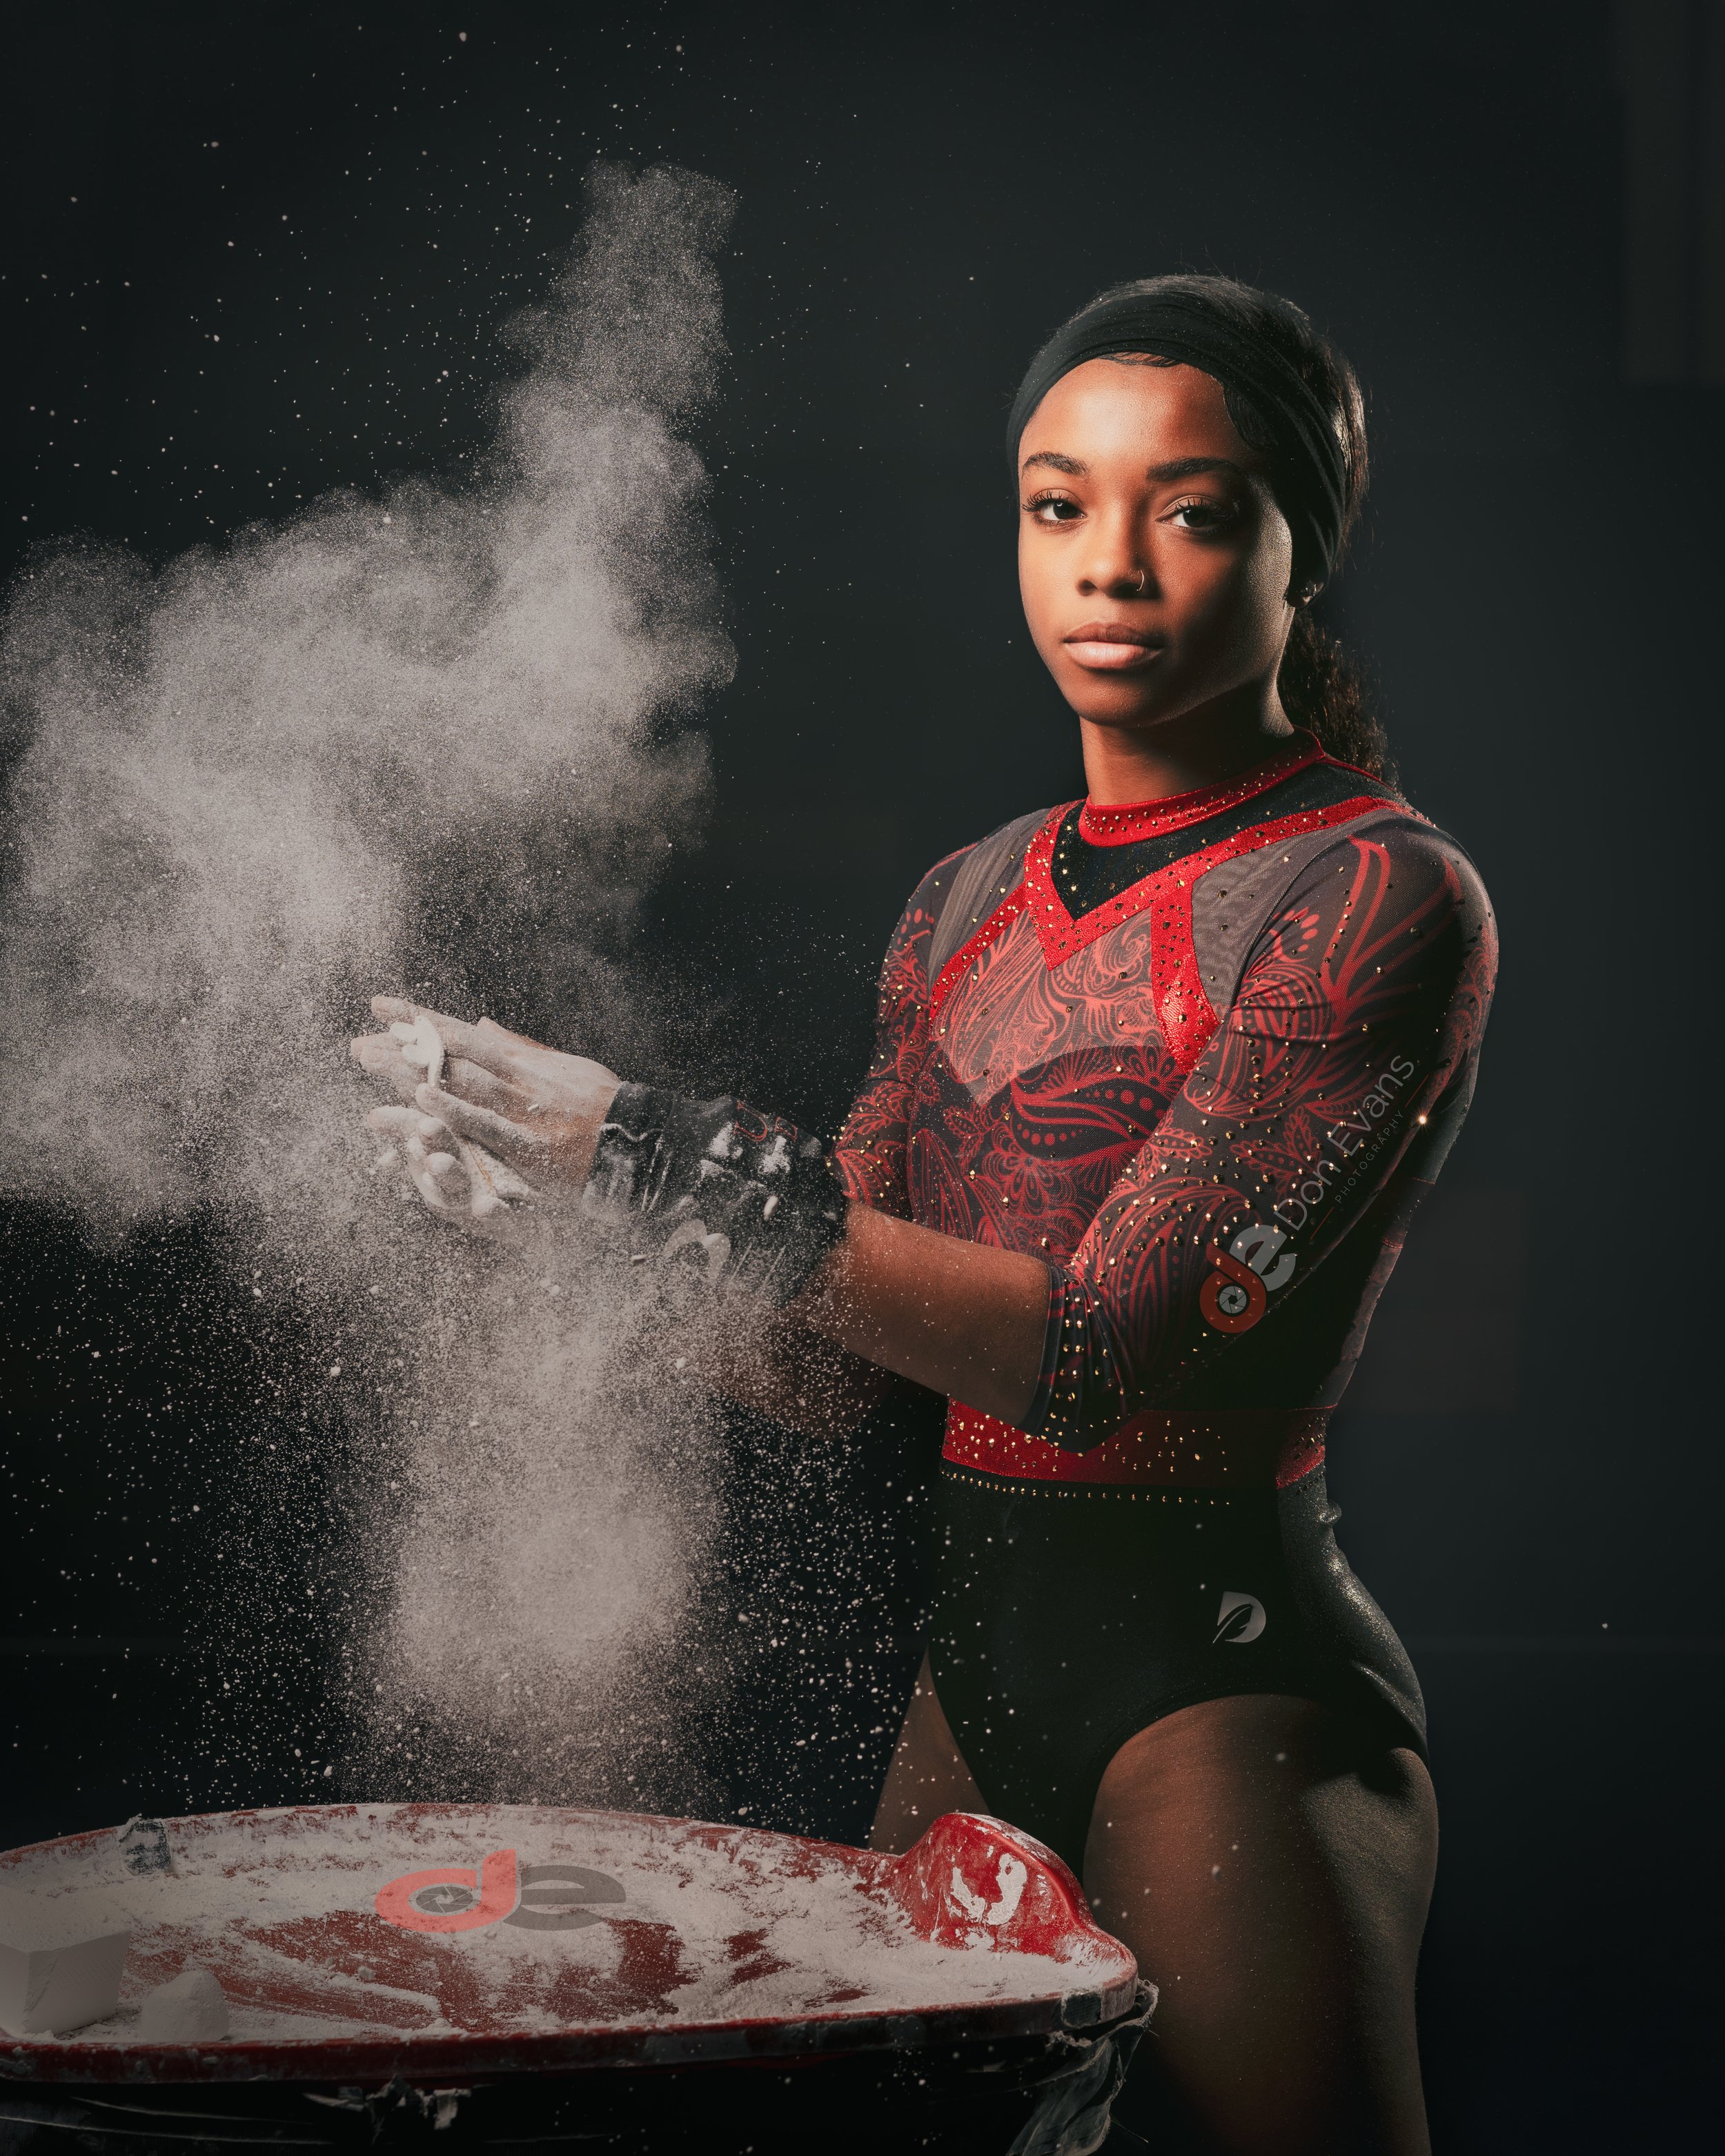  Don Evans Sports Photography in Greensboro NC Gymnast chalks before the bars during her gymnastics tournament competition with dramatic lighting 